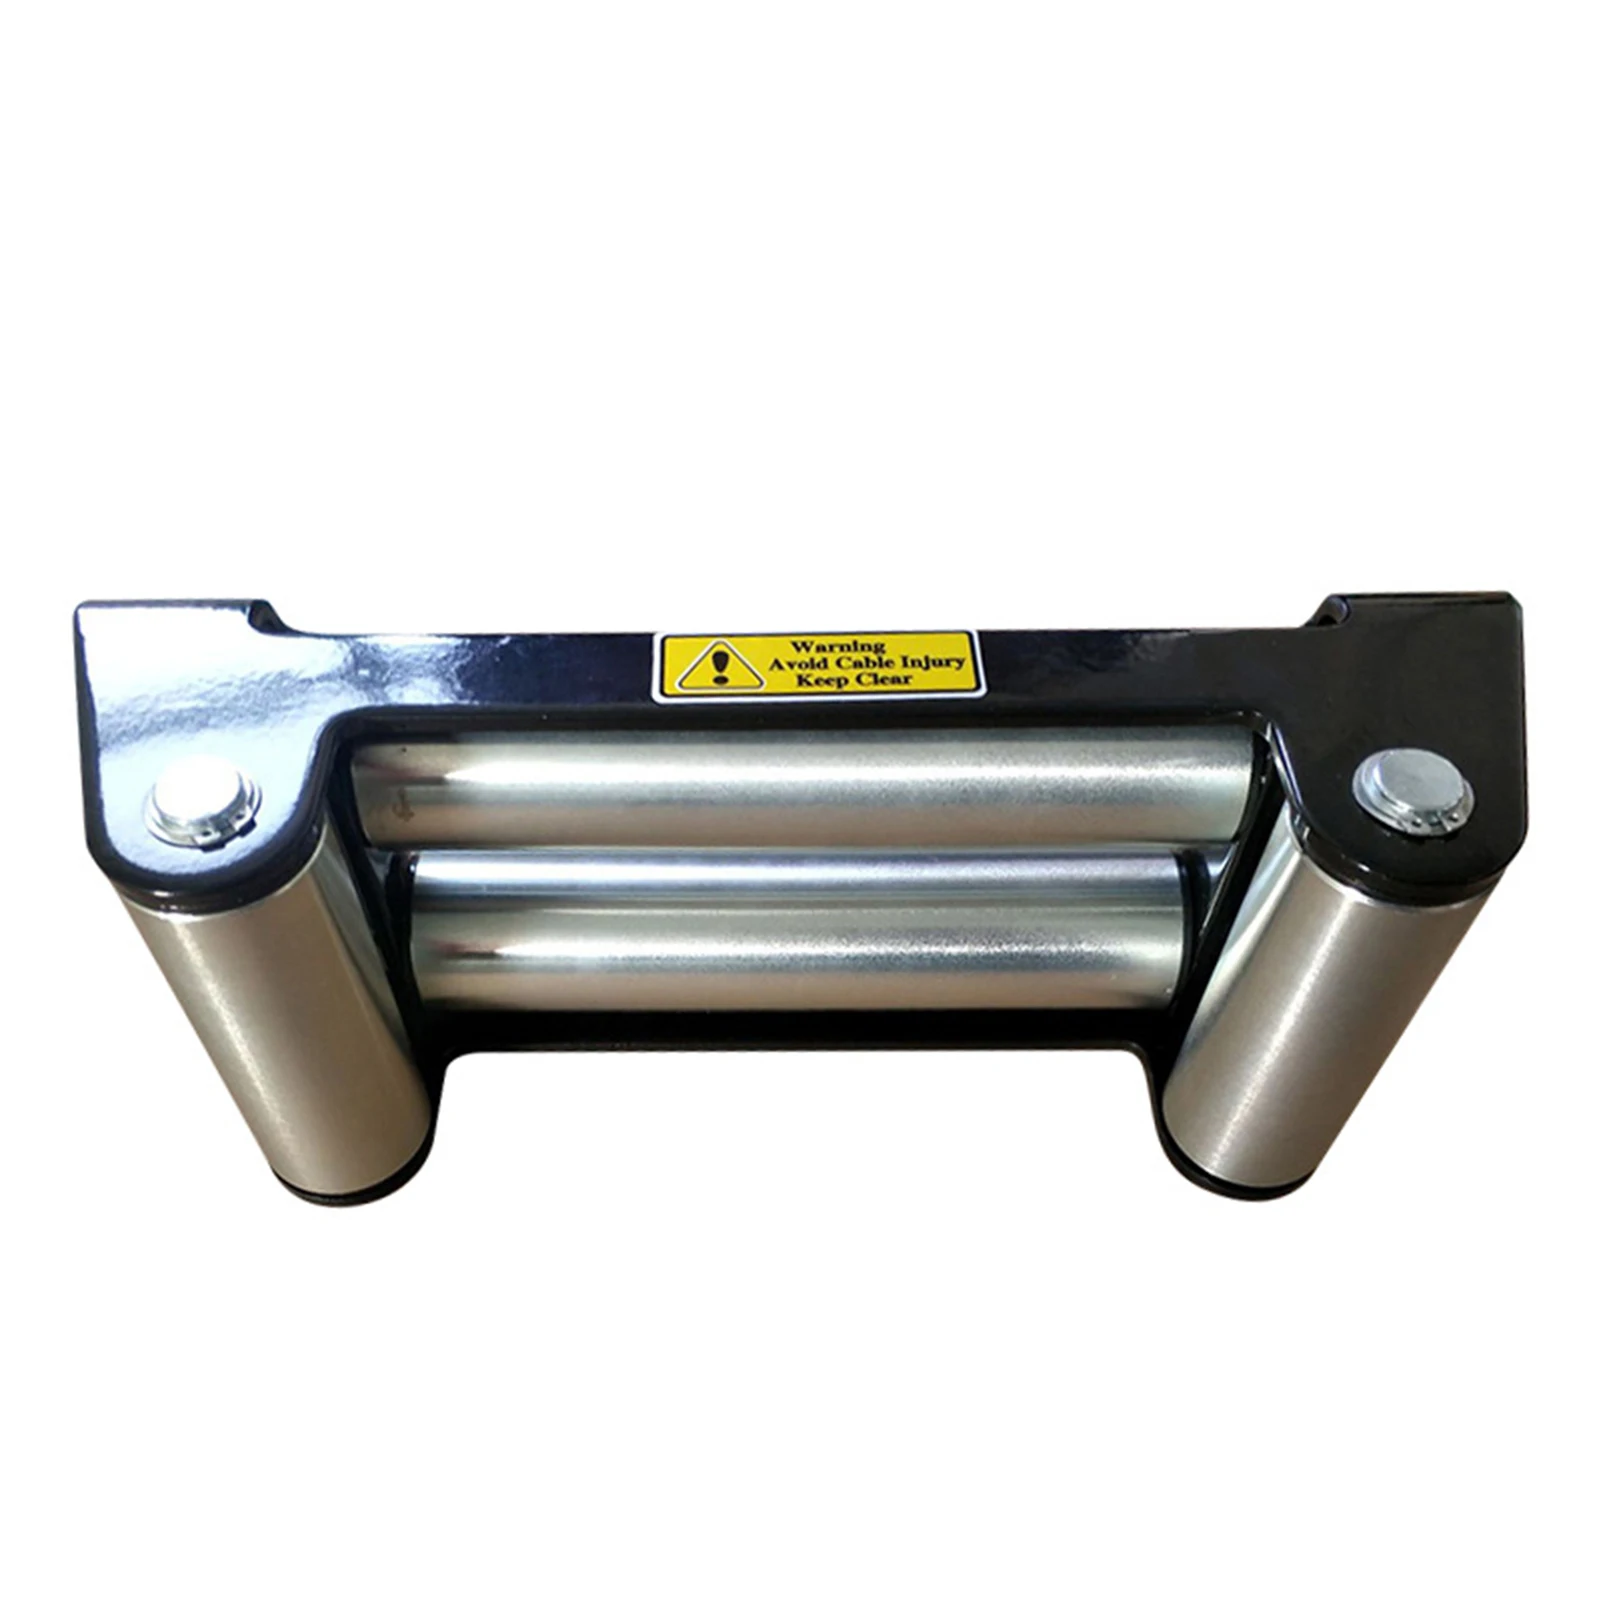 

Winch Fairlead Winch Roller Wire Rope Roller Fairlead Reduces Friction And Protects Cable Rope From Wear Suitable For Most Winch